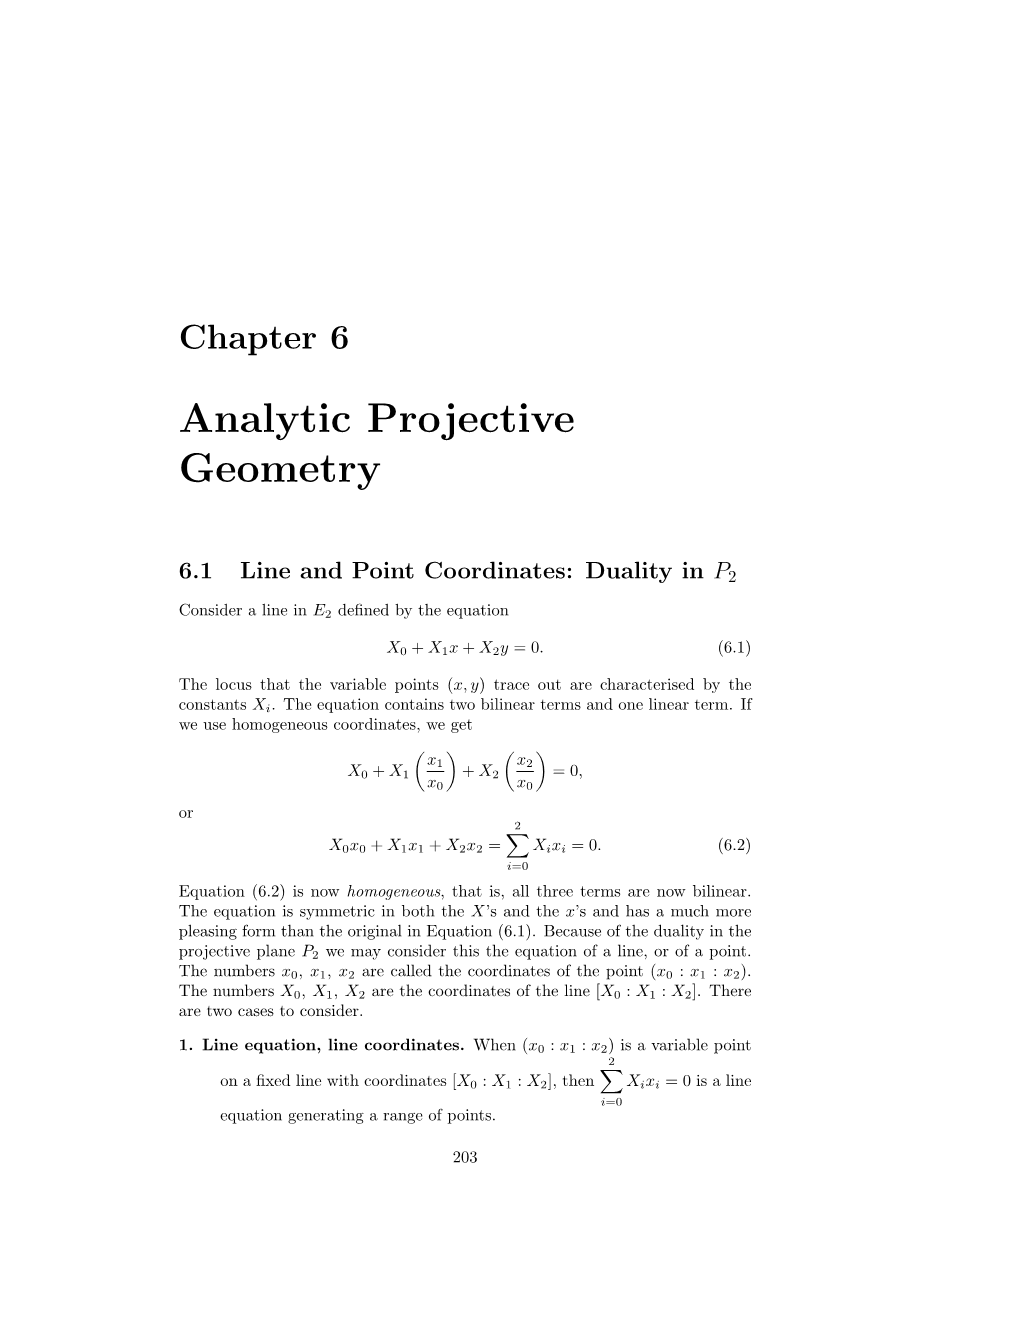 Chapter 6, Analytic Projective Geometry